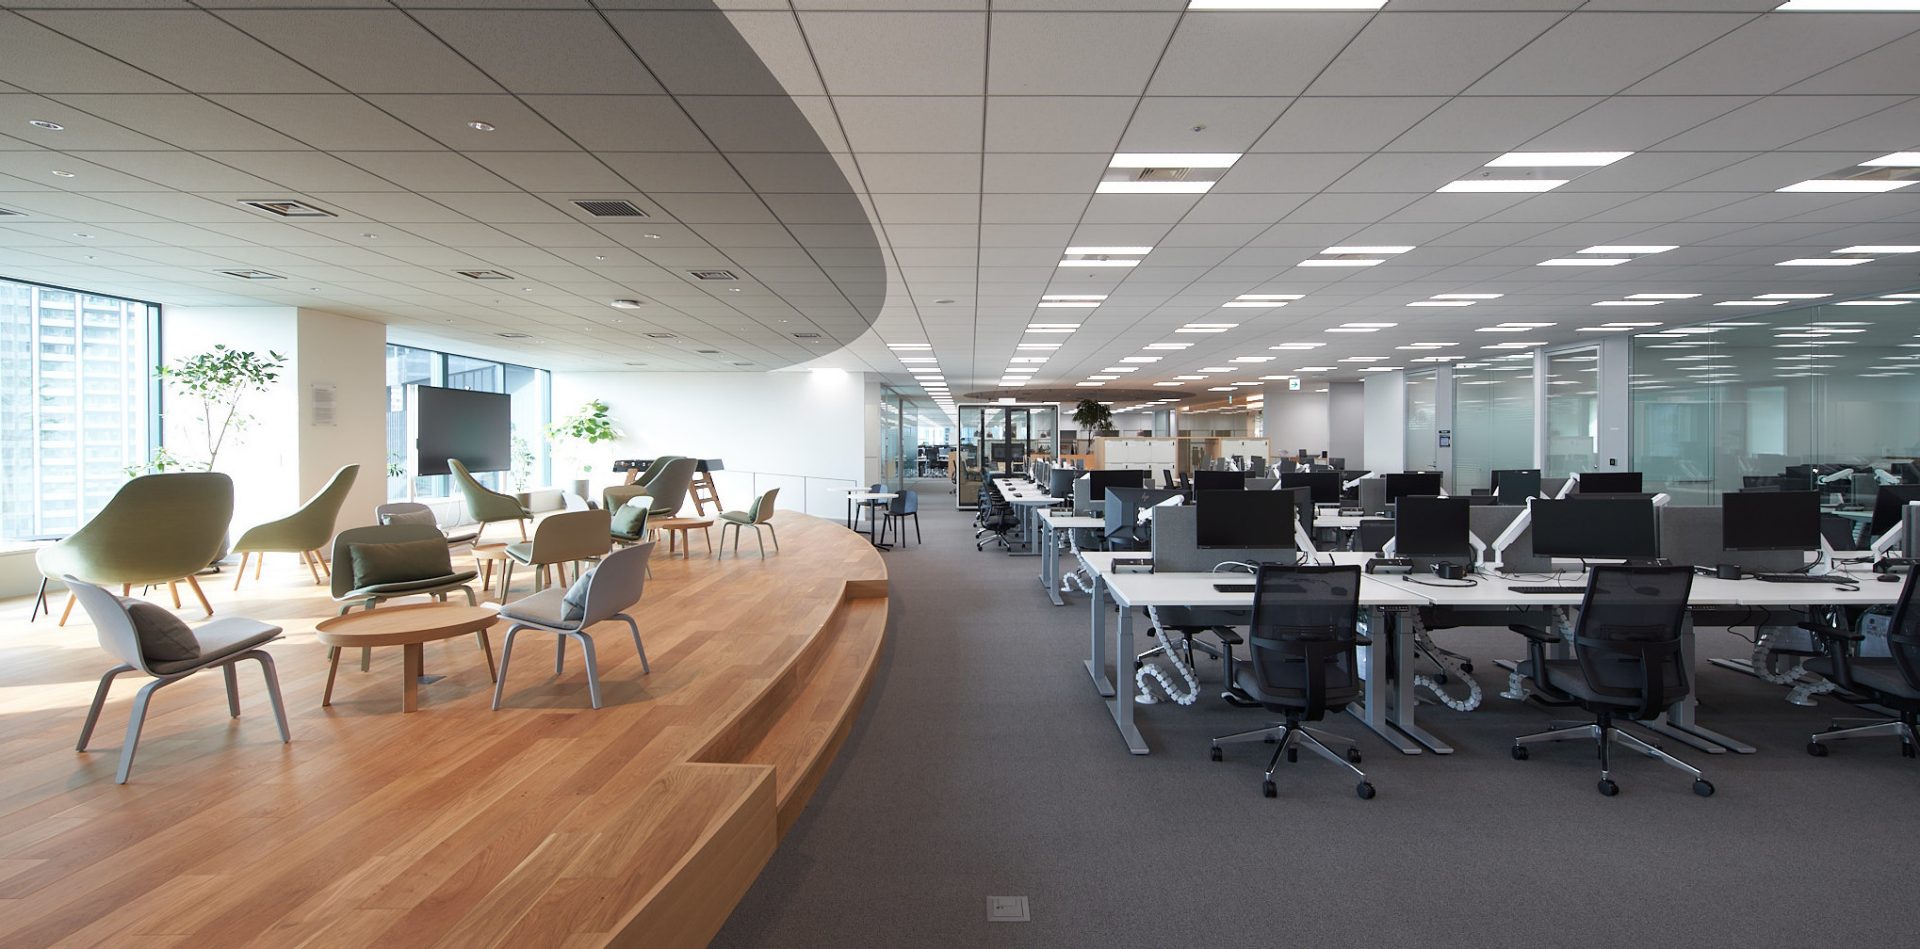 This picture shows an interior view of the BMW Group Japan headquarter.